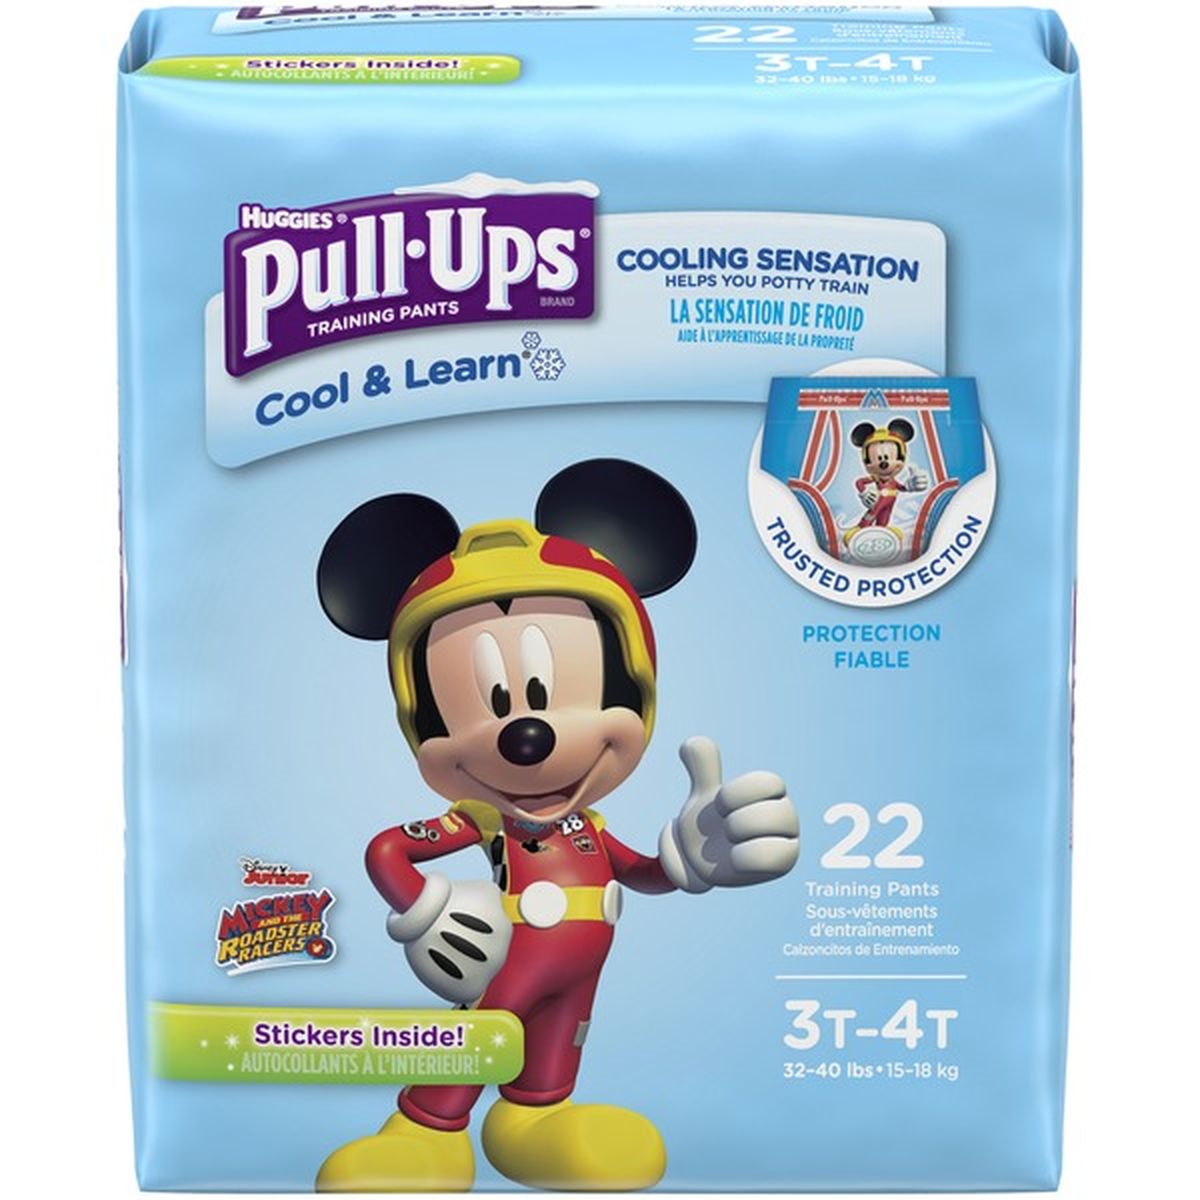 Pull-Ups Cool & Learn Potty Training Pants for Boys, 3T-4T (32-40